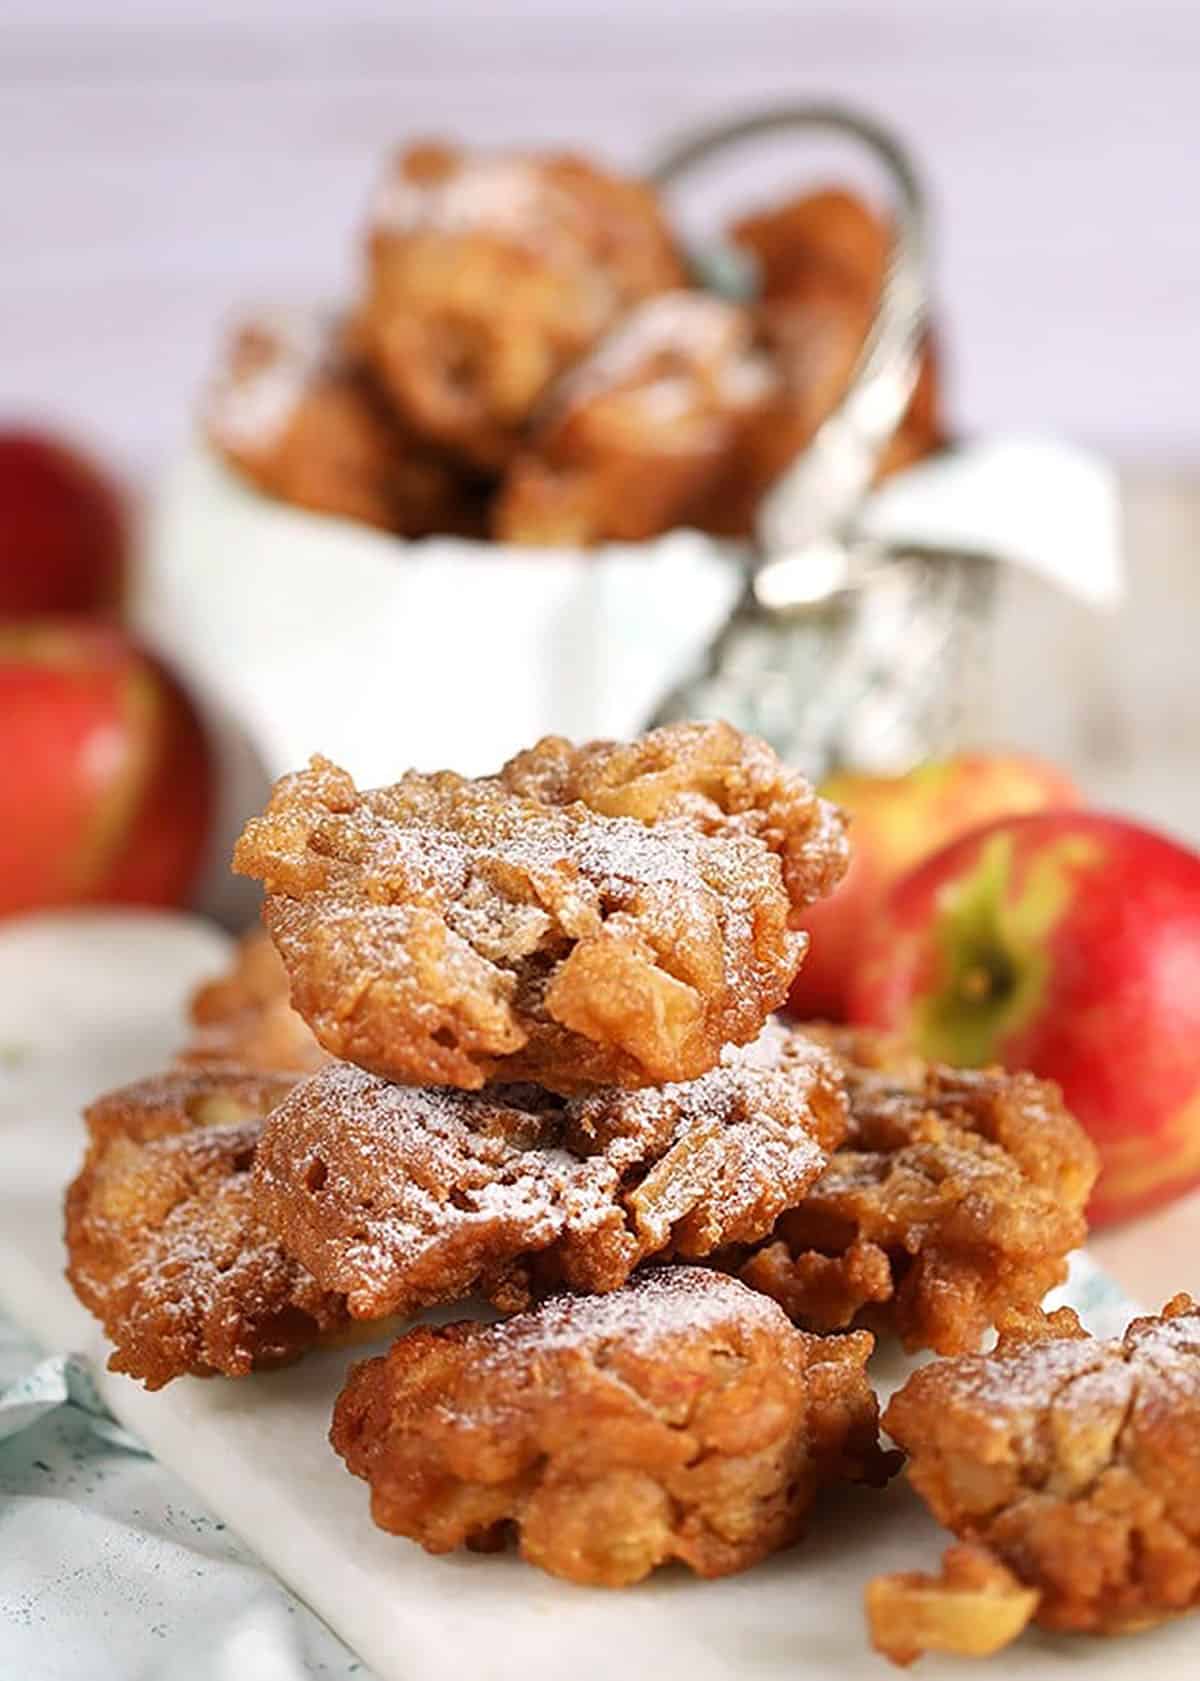 Apple fritters piled in a metal basket with a white napkin.